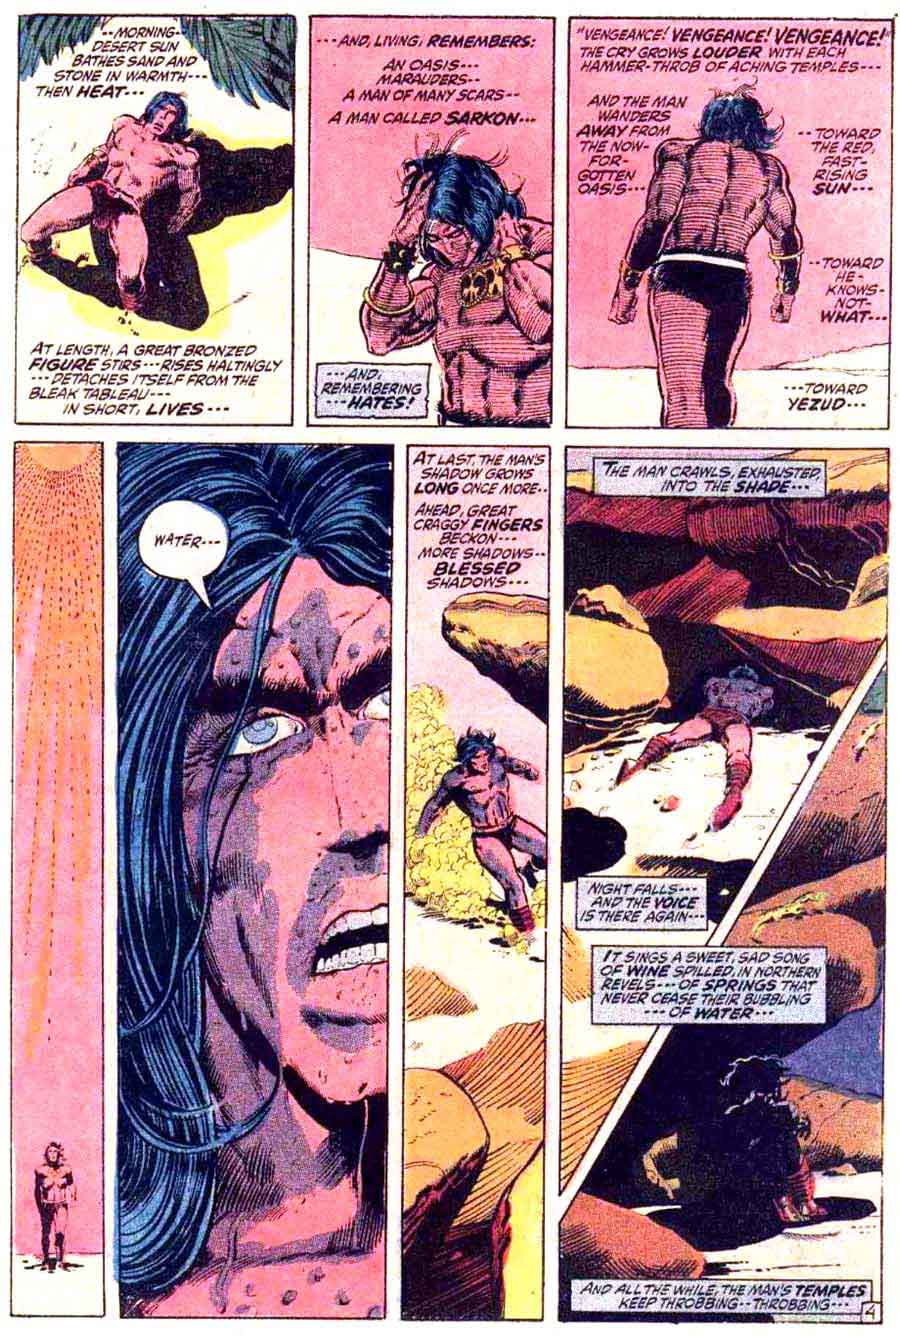 Conan the Barbarian v1 #13 marvel comic book page art by Barry Windsor Smith